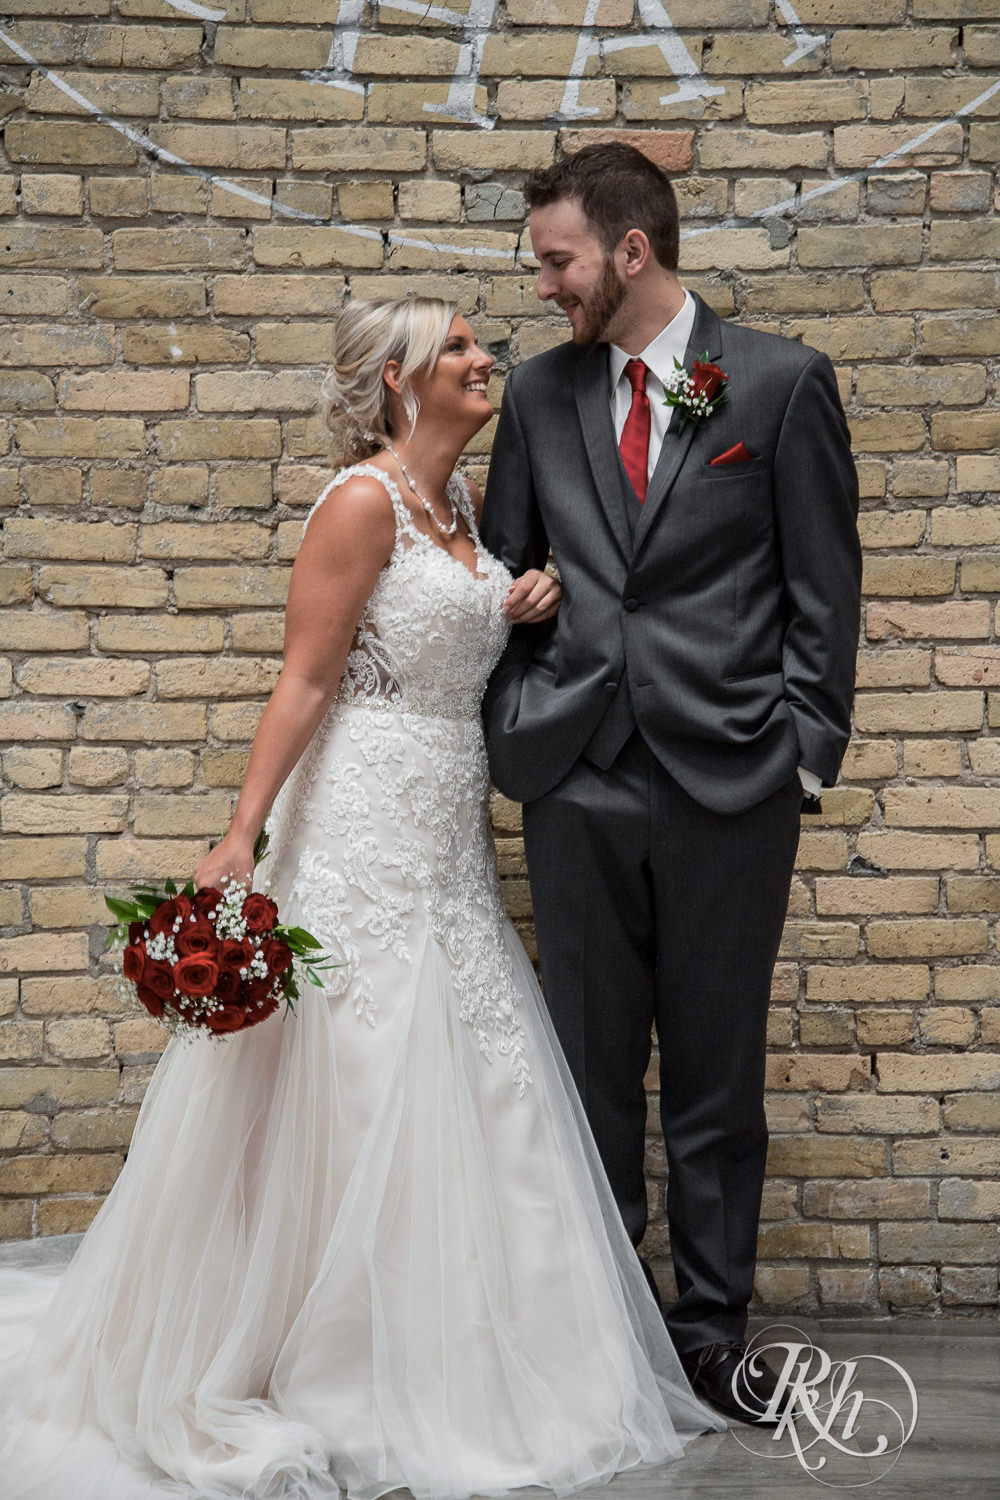 Bride and groom smile on wedding day at Lumber Exchange Event Center in Minneapolis, Minnesota.